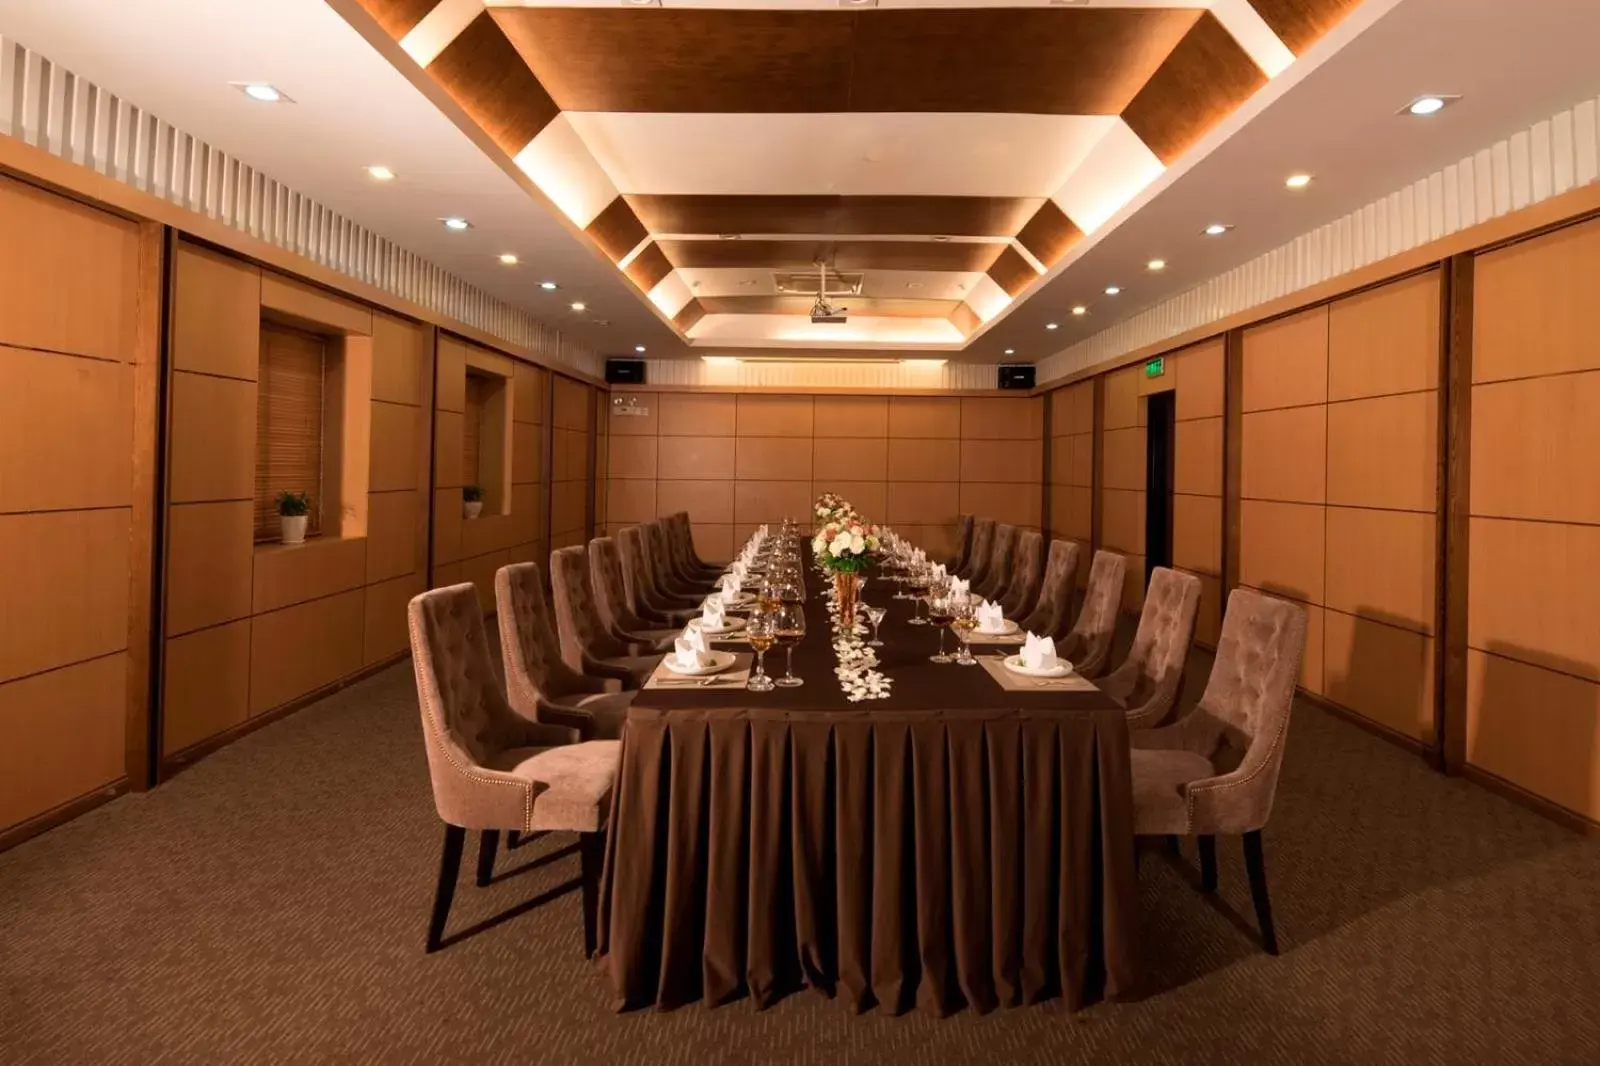 Banquet/Function facilities in Vien Dong Hotel